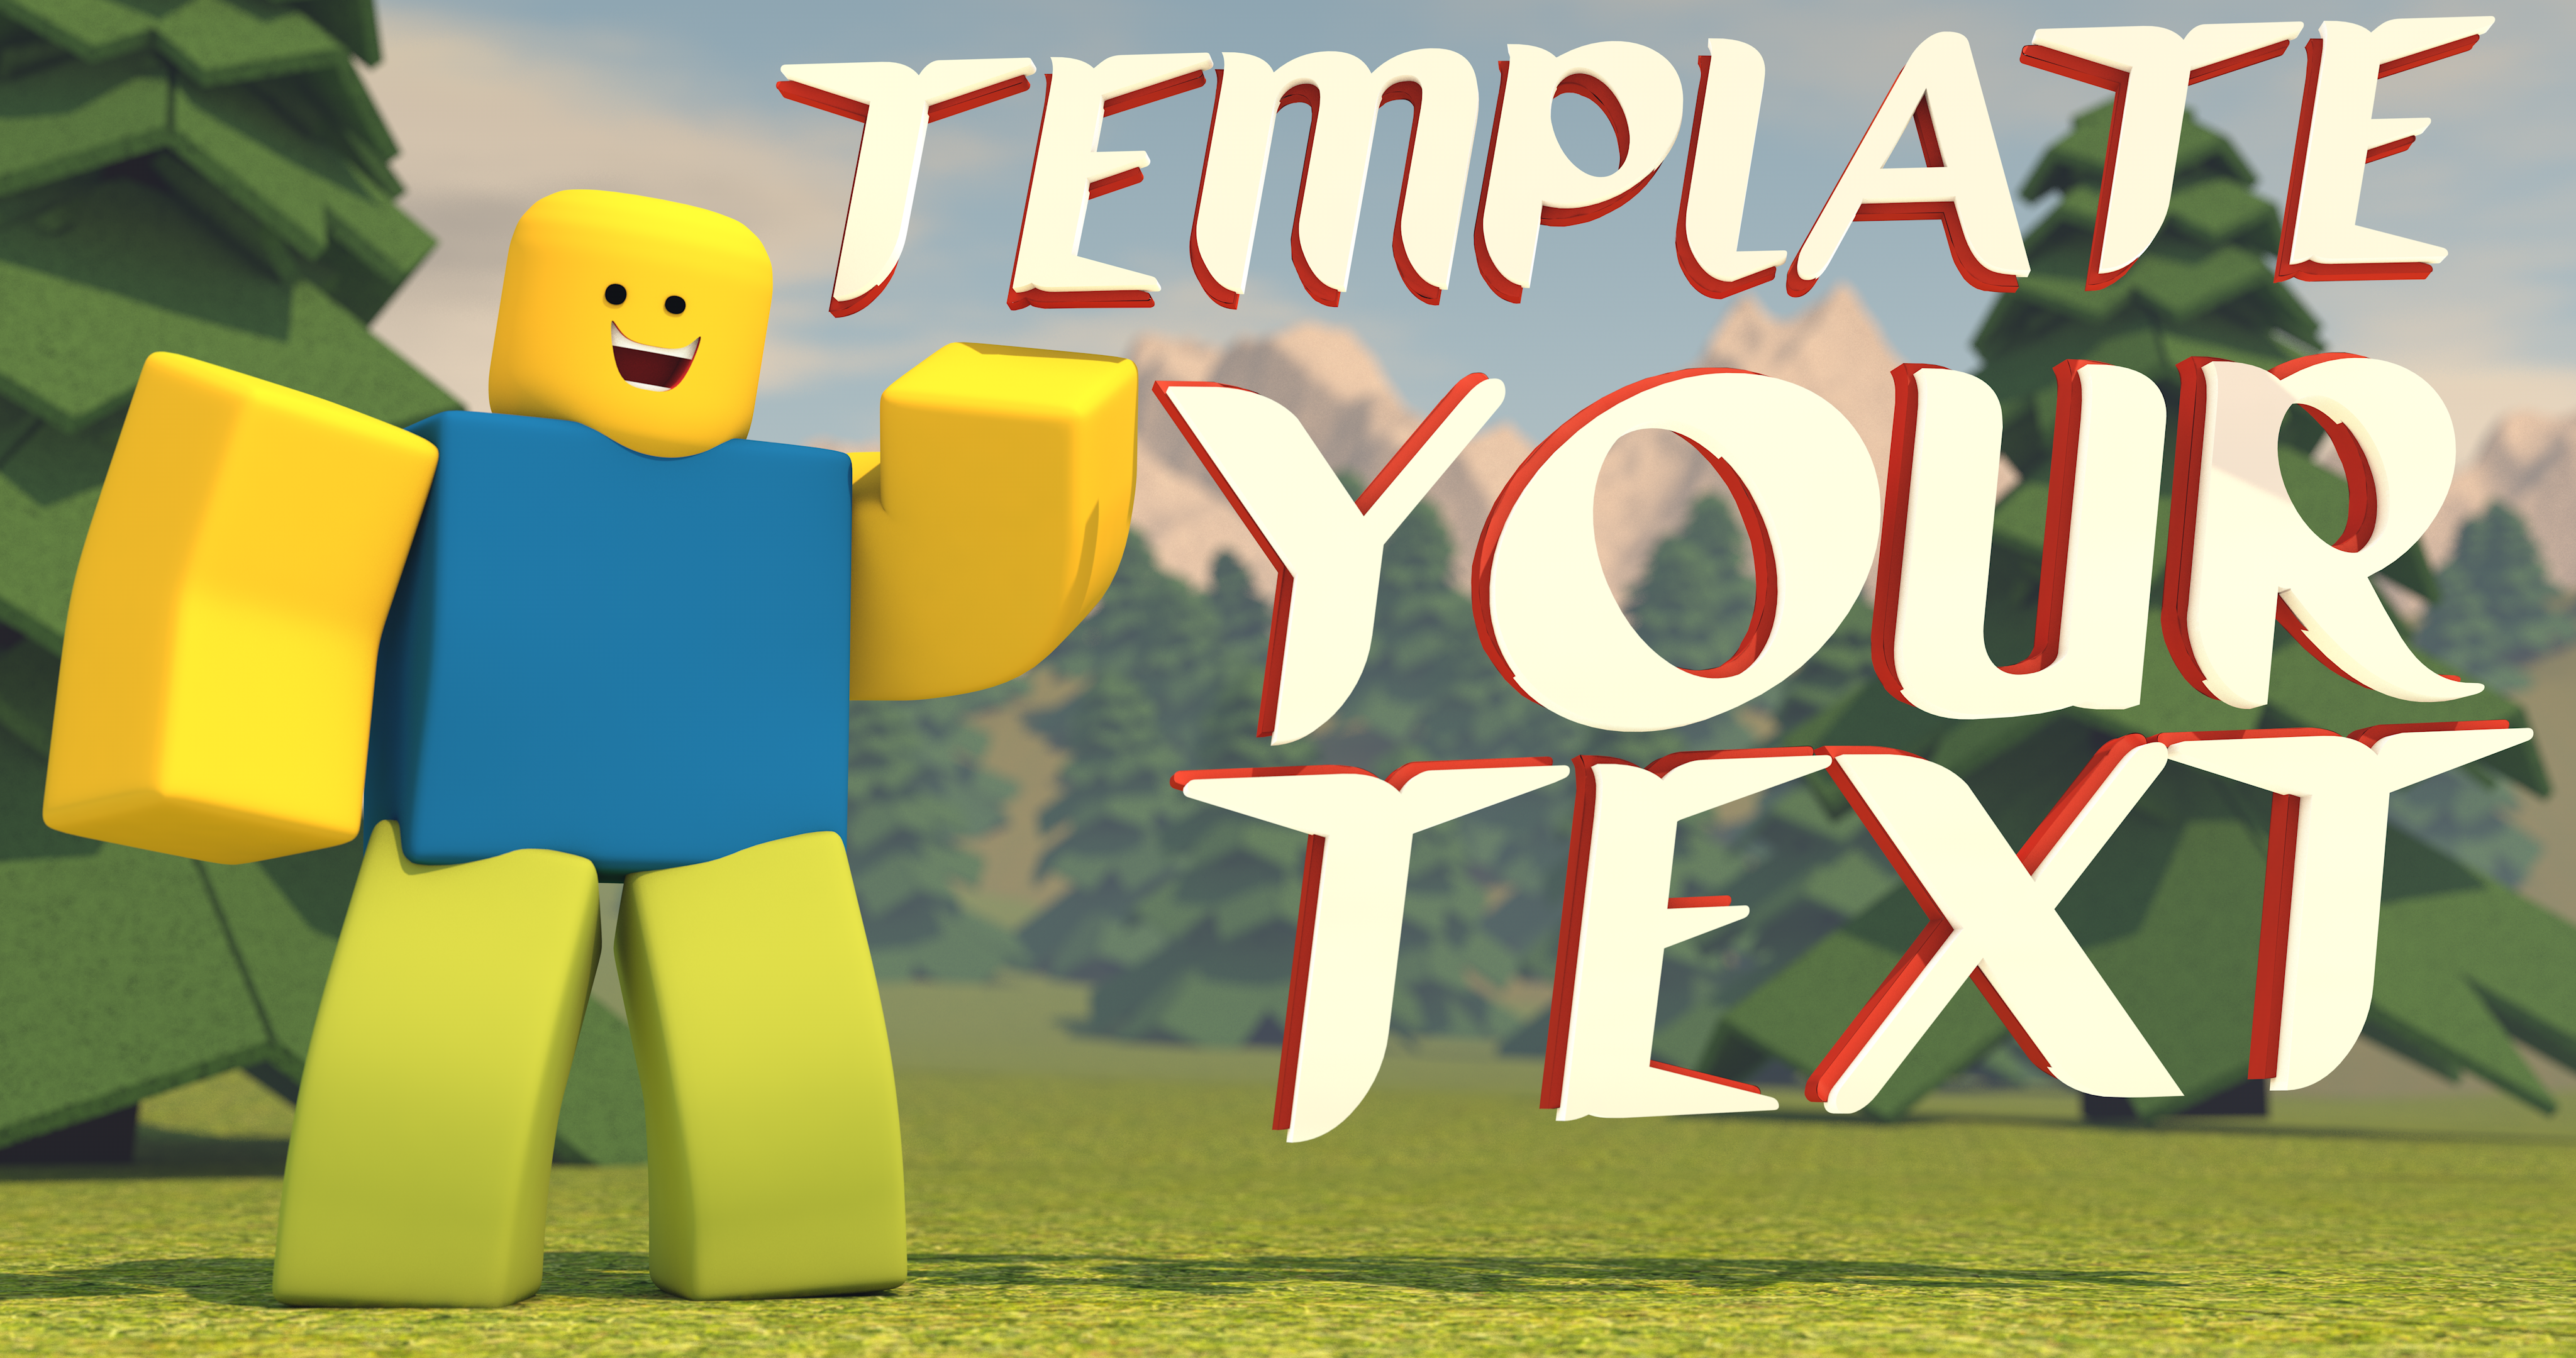 Comission Roblox Thumbnail Template Low Price By Buleredits On Deviantart - thumbnail size roblox